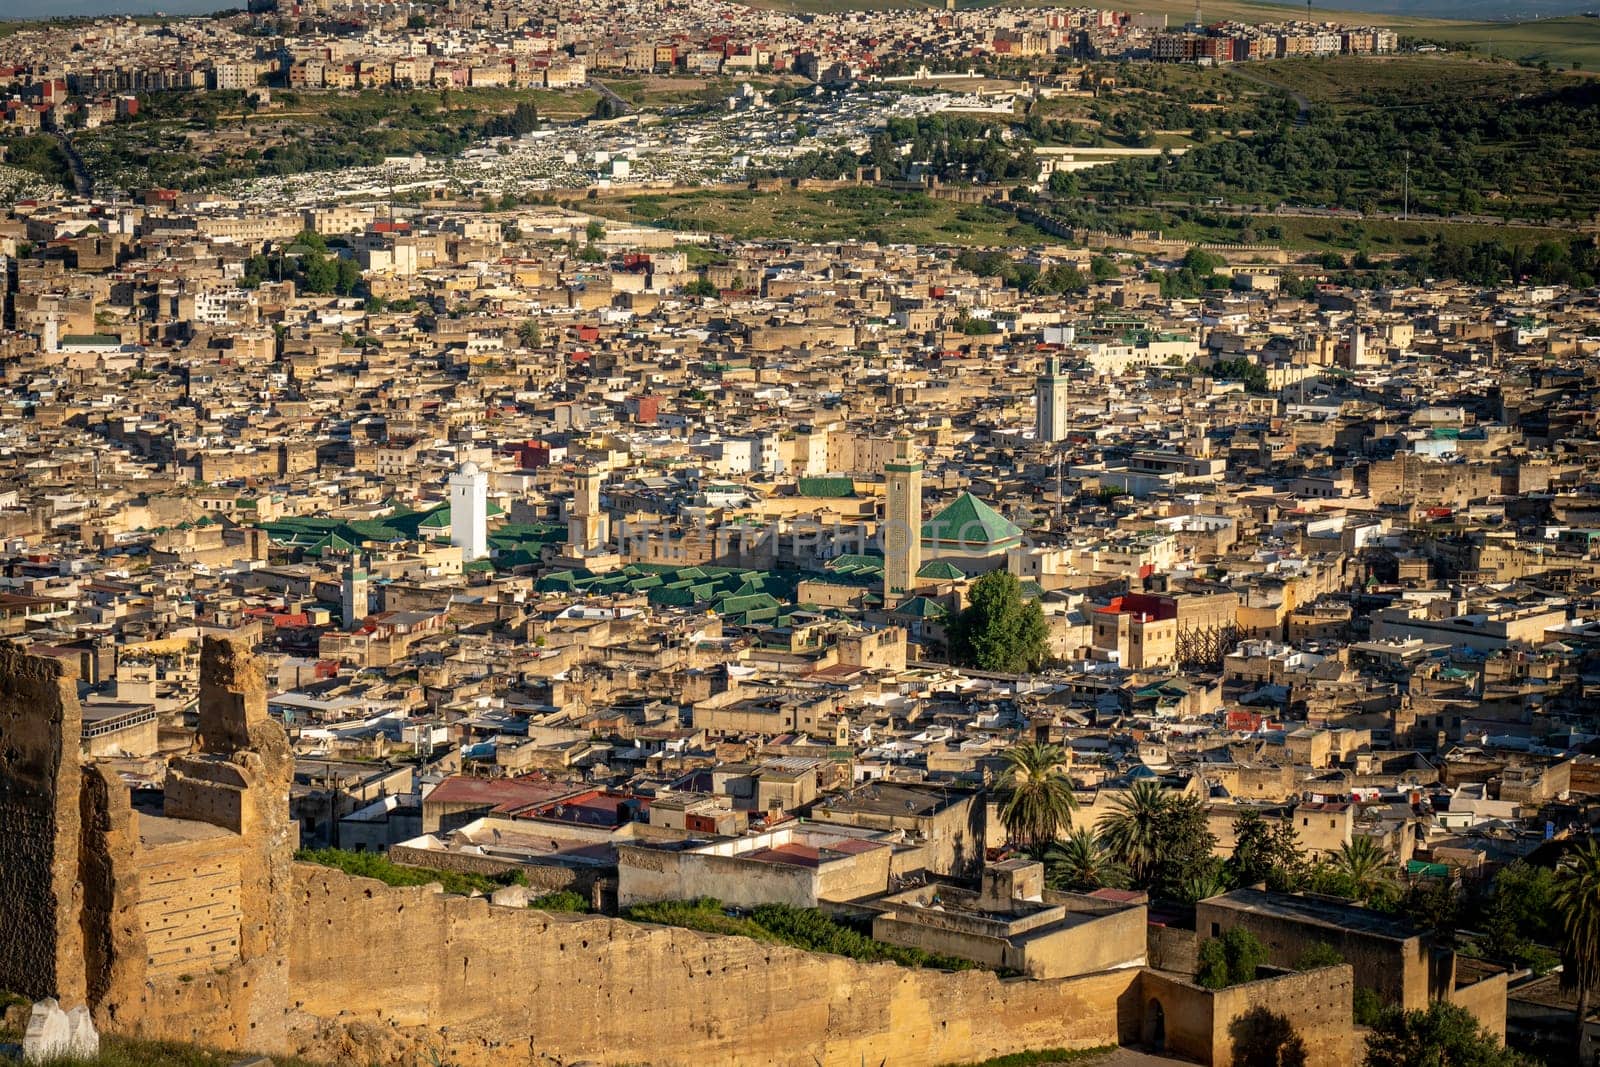 Telephoto View of Fez Medina from Marinid Necropolis by LopezPastor